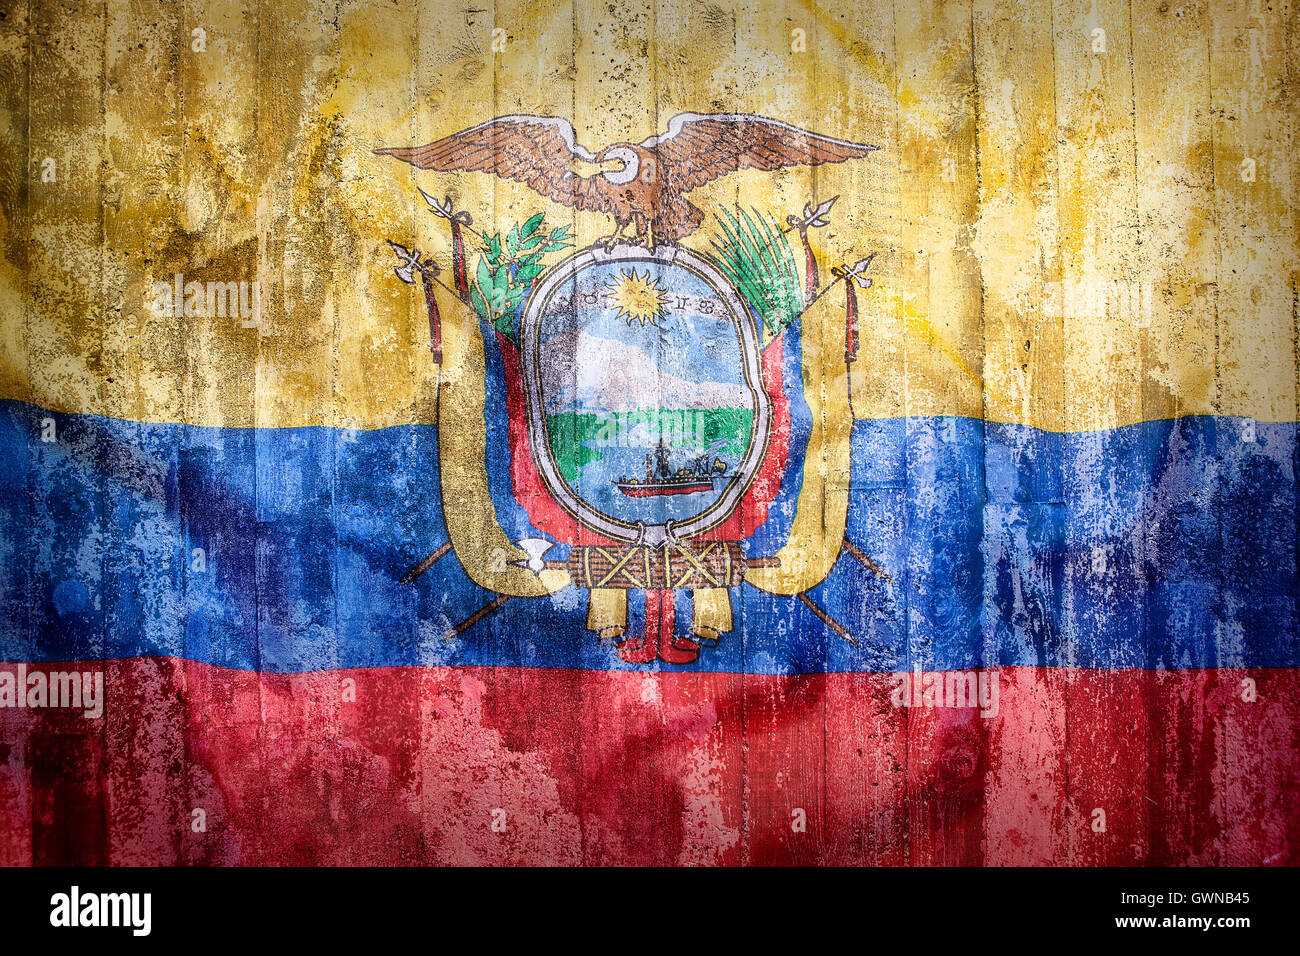 Grunge style of Ecuador flag on a brick wall for background Stock Photo